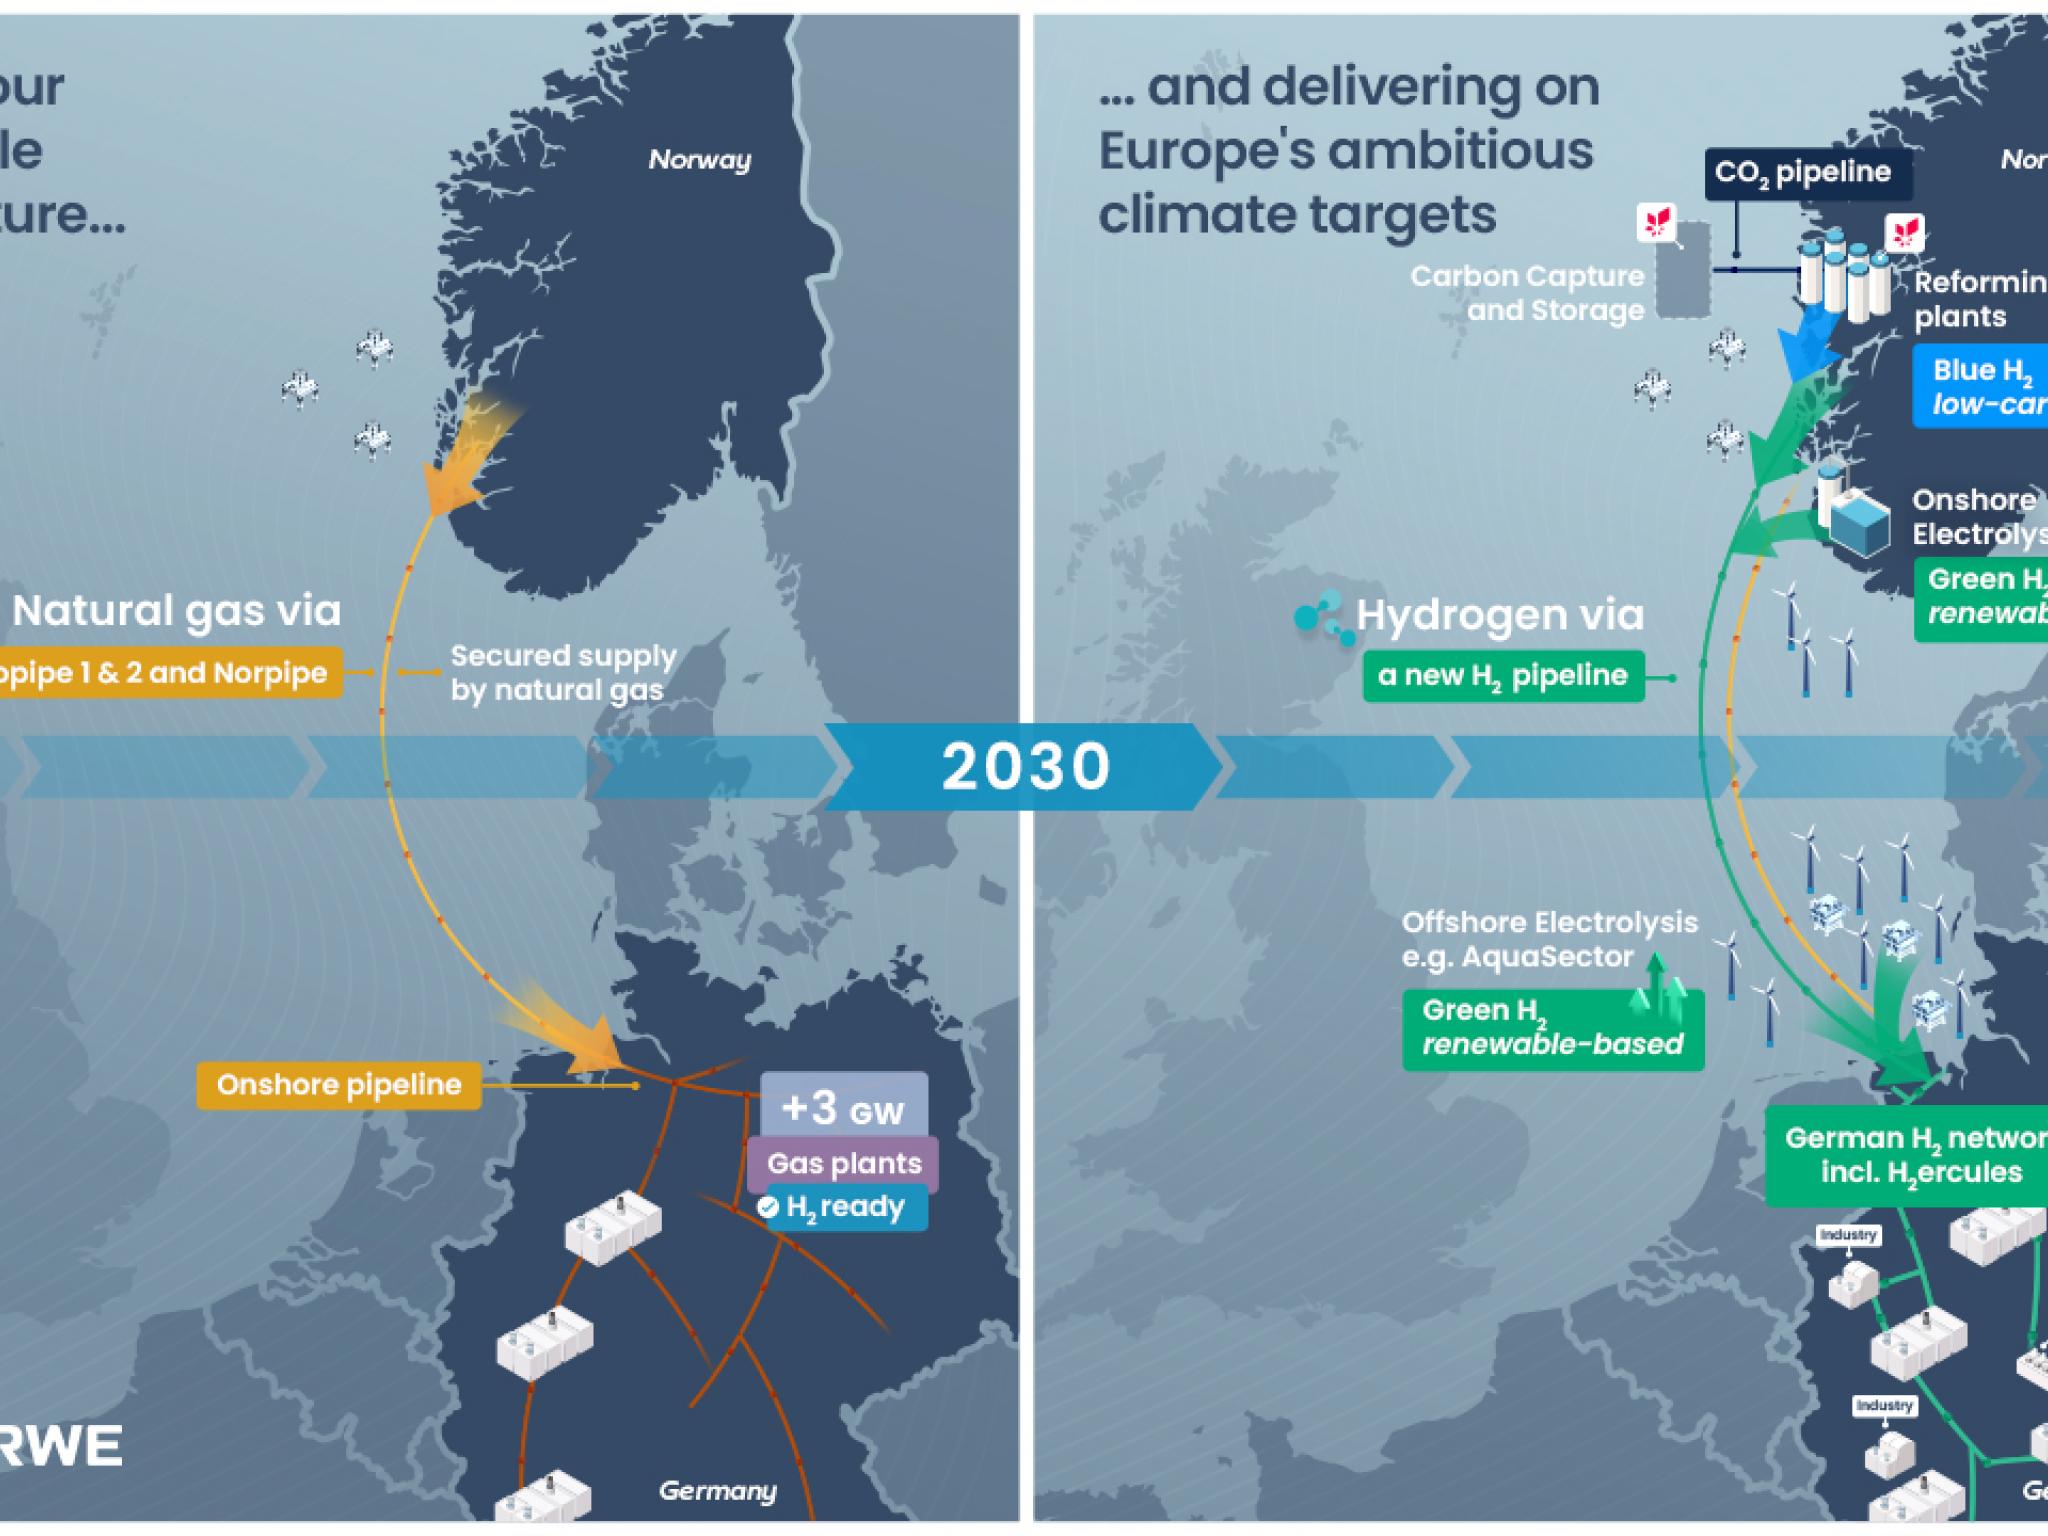  equinor-rwe-partner-on-hydrogen-supply-chain-to-help-germany-ease-out-coal-dependency 